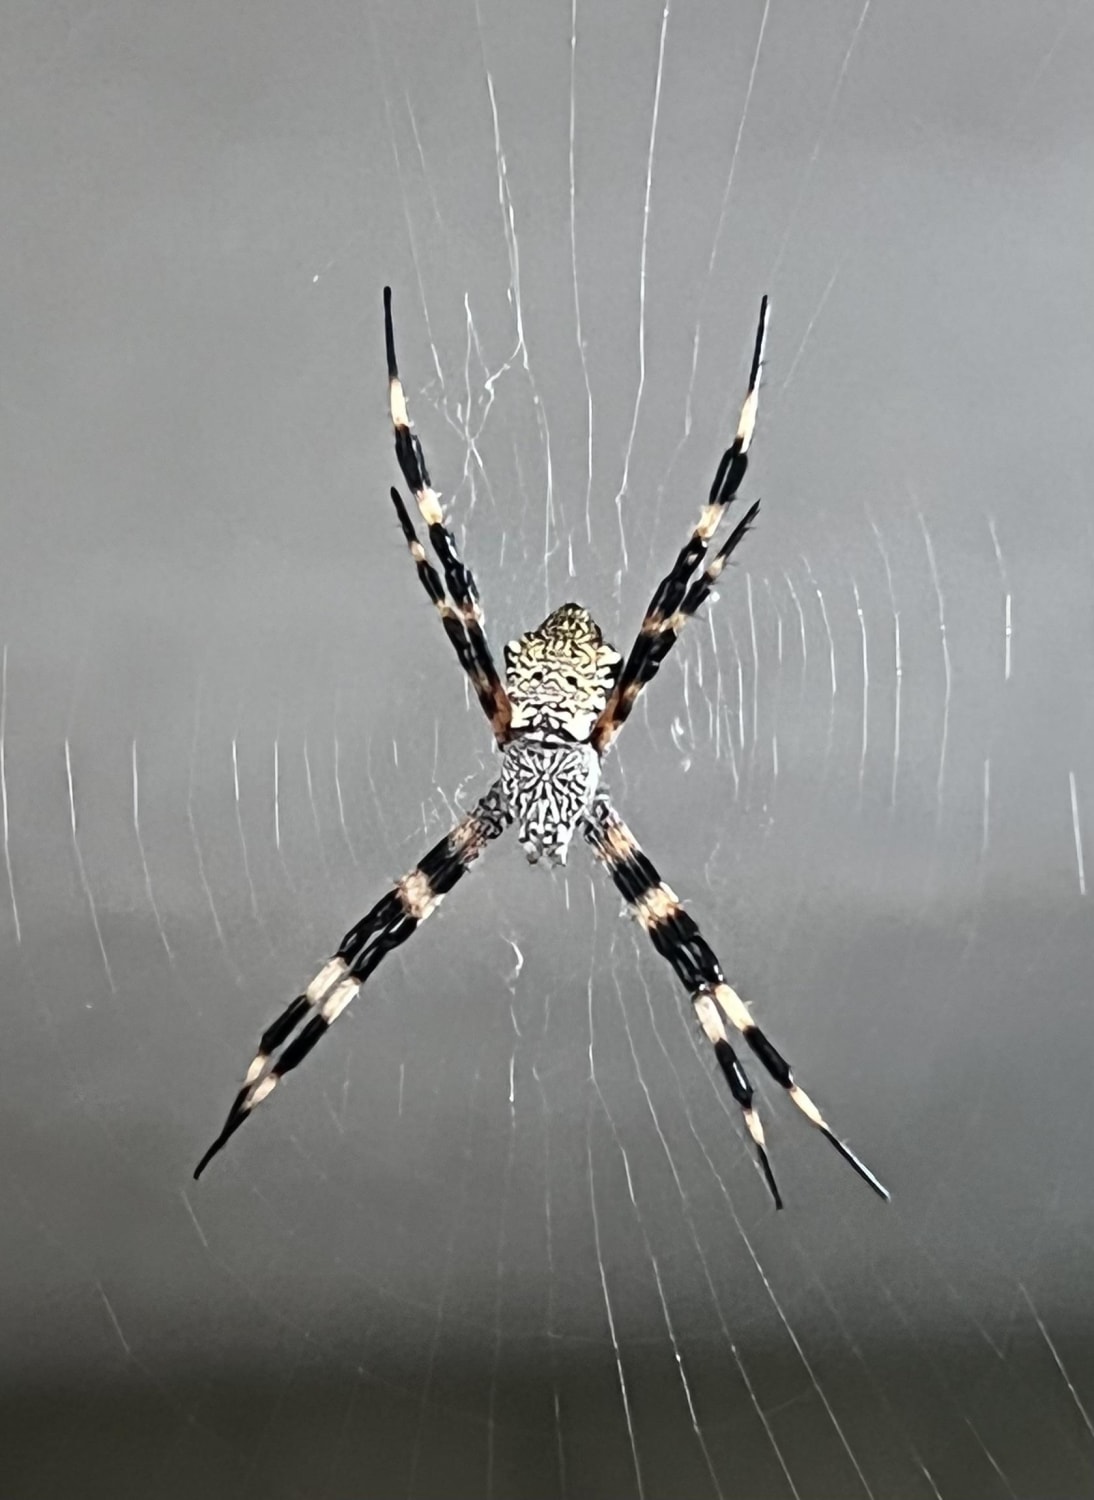 Argiope appensa, commonly known as Hawaiian Garden Spider, spins large webs which have varying zig-zag pattern running from the ends to the center. These zig zags known as stabilimenta, alert birds and other large animals (including humans) to the web's presence.